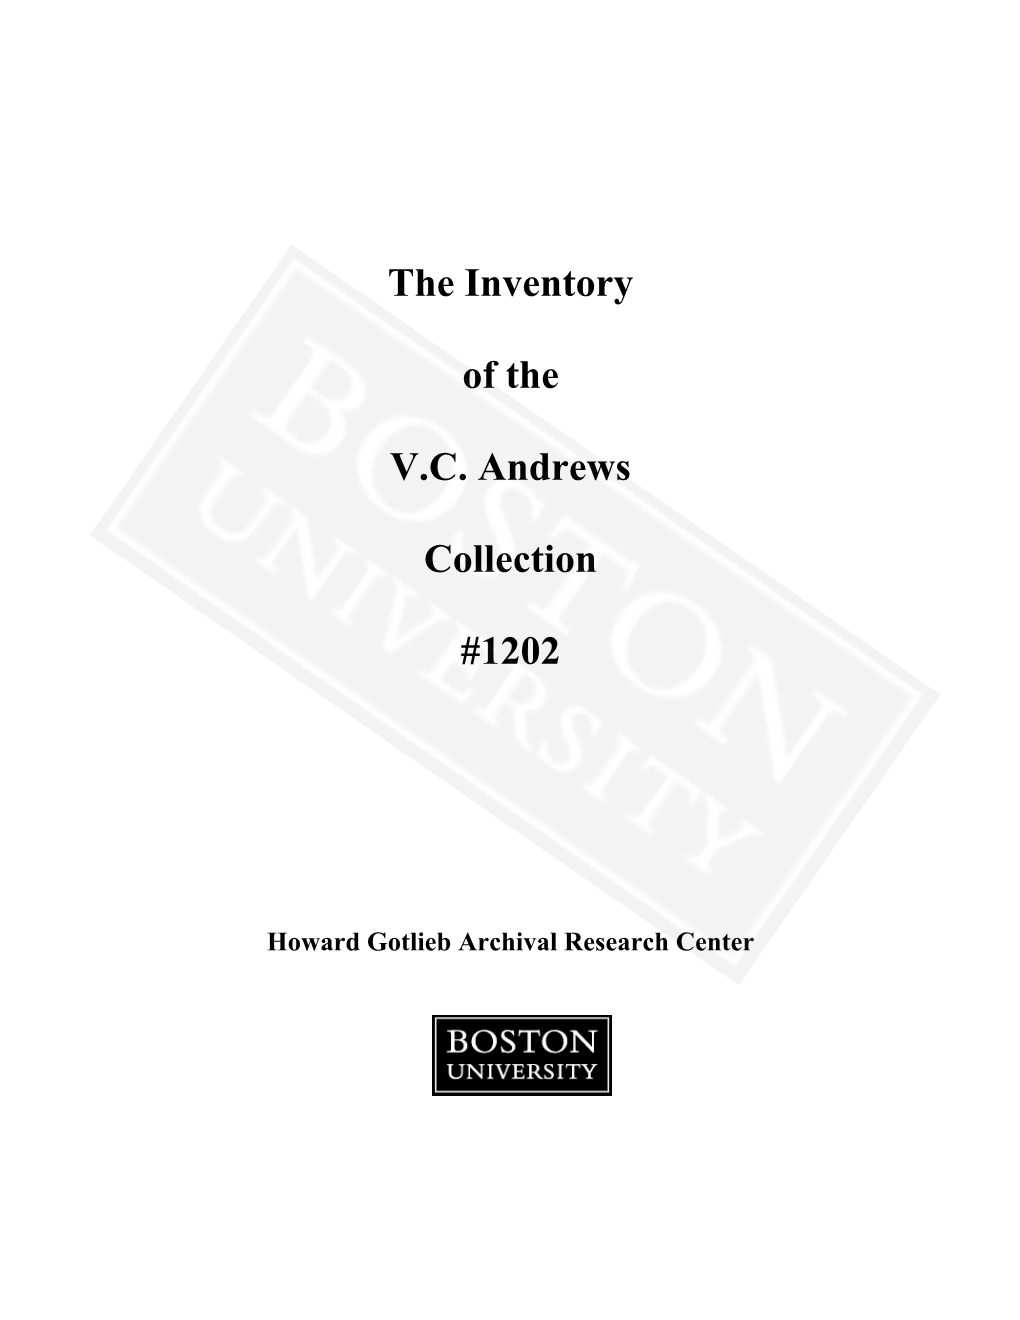 The Inventory of the V.C. Andrews Collection #1202